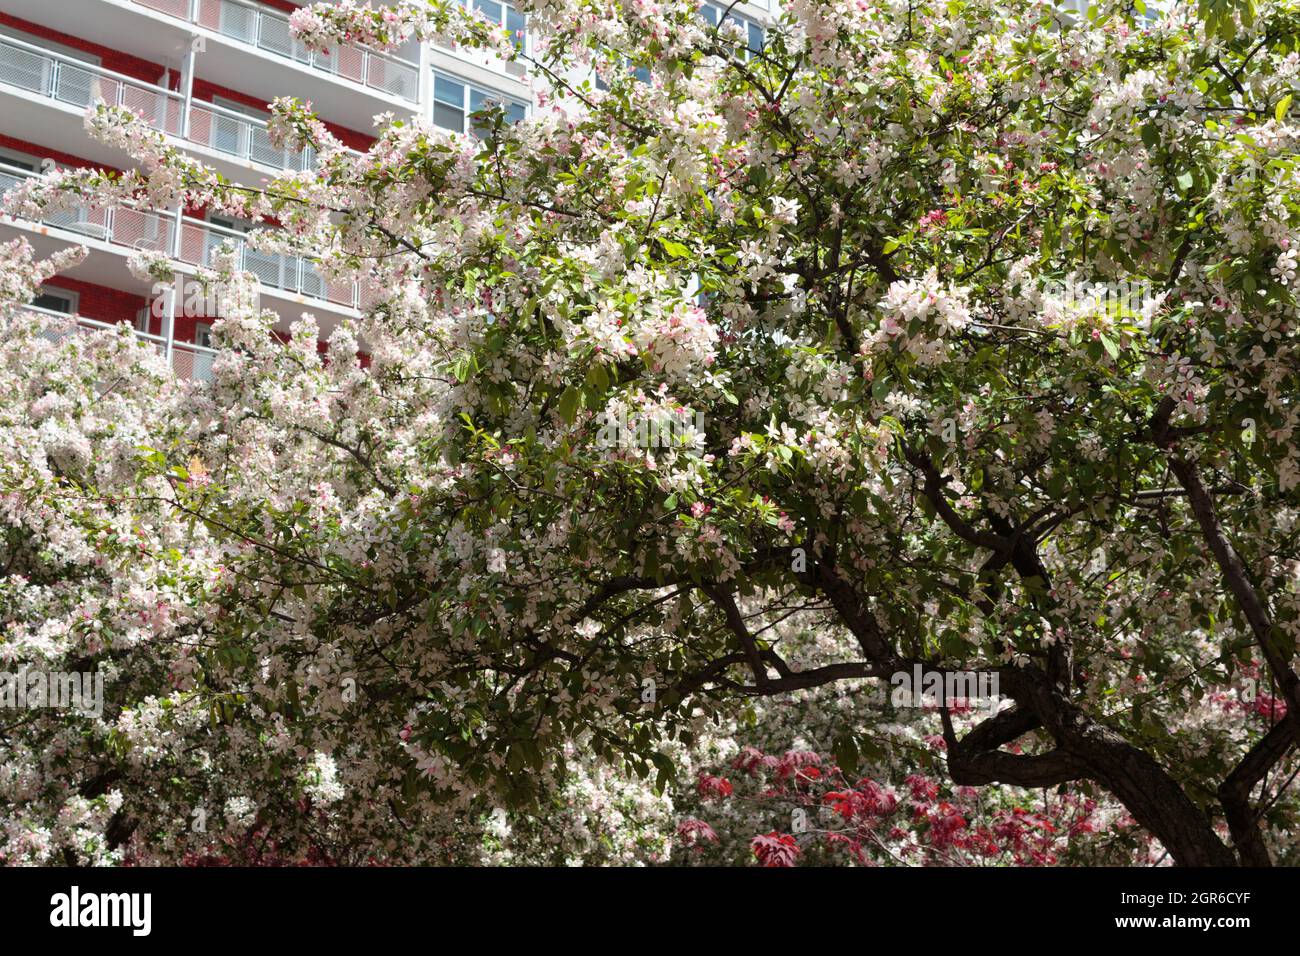 cherry blossom trees in full bloom in courtyard of the staff housing complex of New York University in the West Village, staff housing building in bac Stock Photo